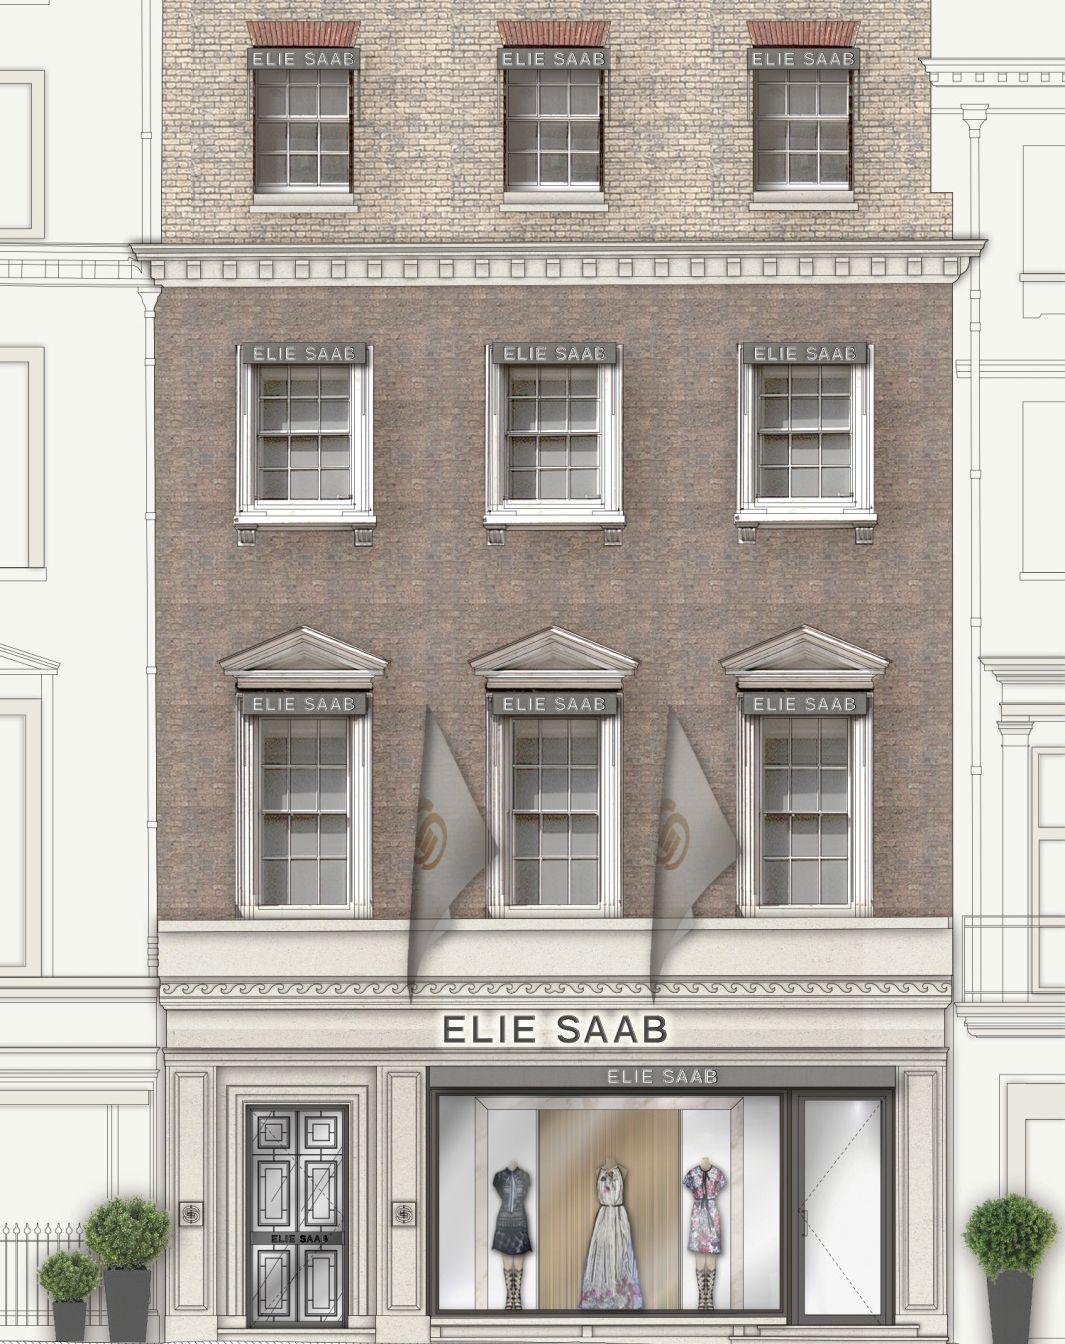  London Flagship in Early 2016 For Brand’s Interior Design Concept